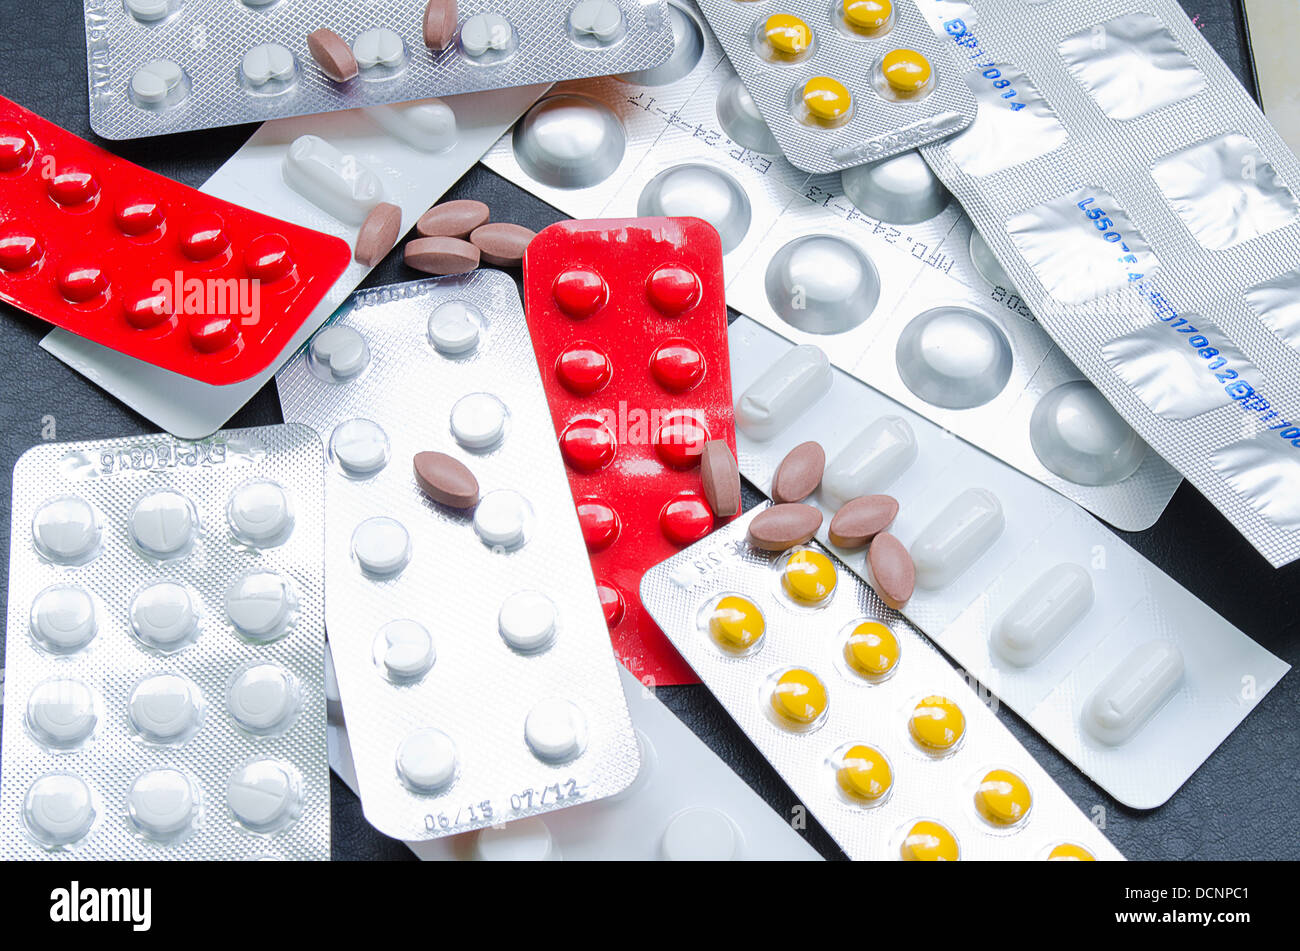 Medicine Drugs Pharmacy is the first aid to get better. Stock Photo